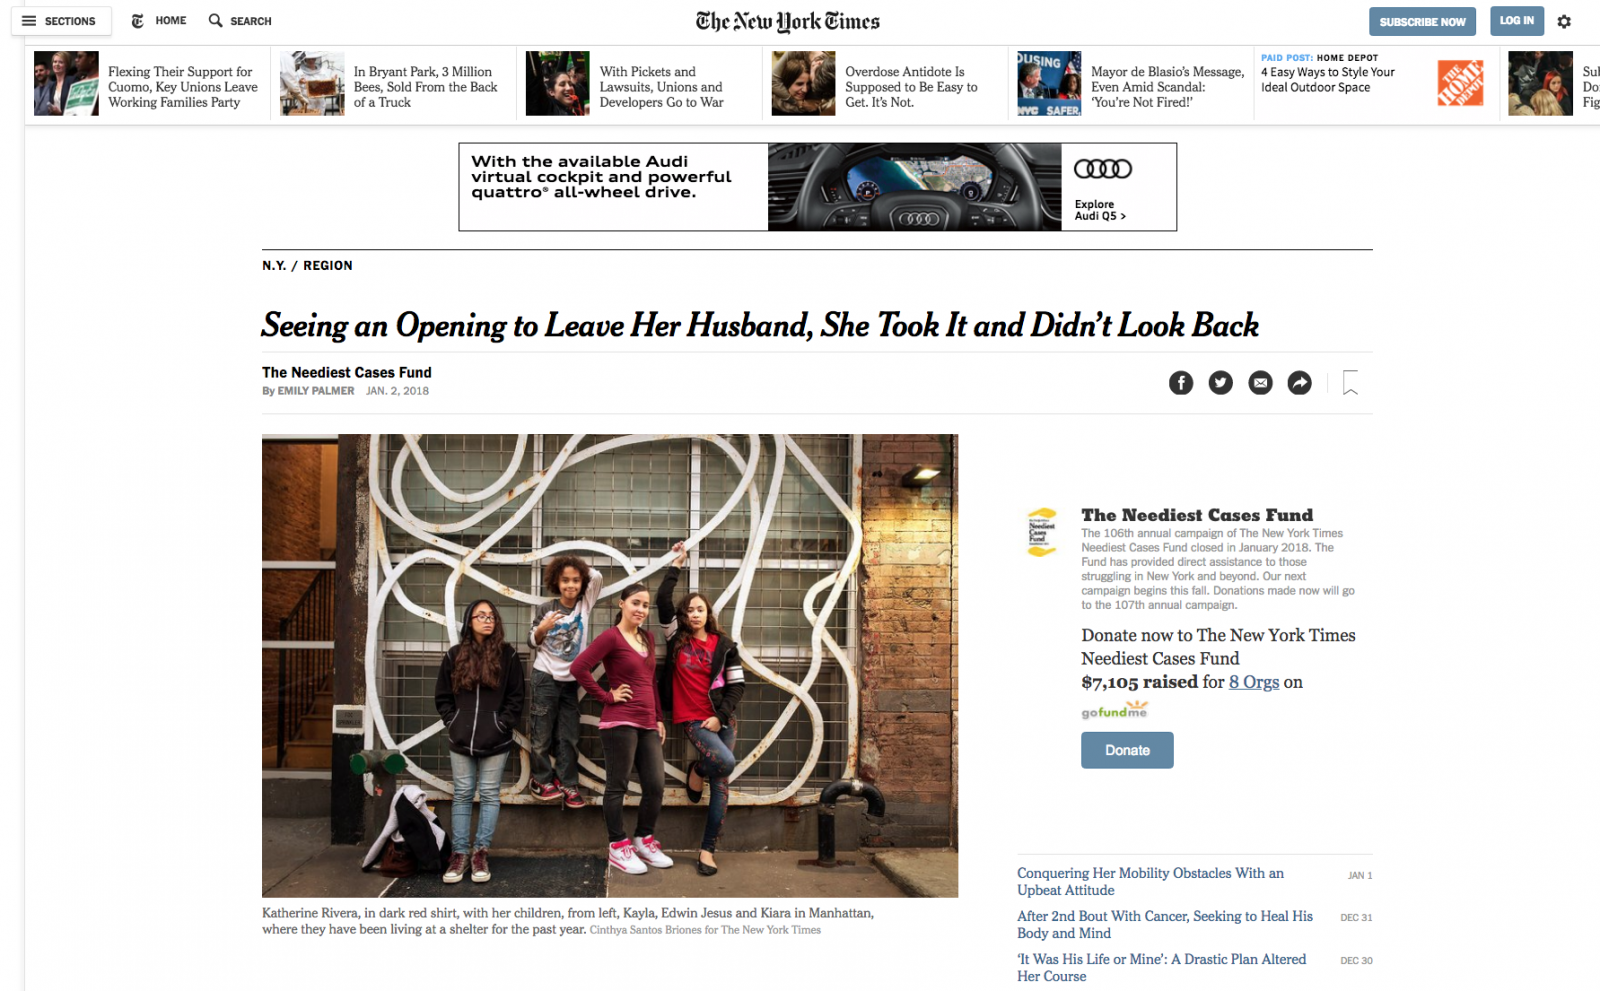  https://www.nytimes.com/2018/01/02/nyregion/seeing-an-opening-to-leave-her-husband-she-took-it-and-didnt-look-back.html 